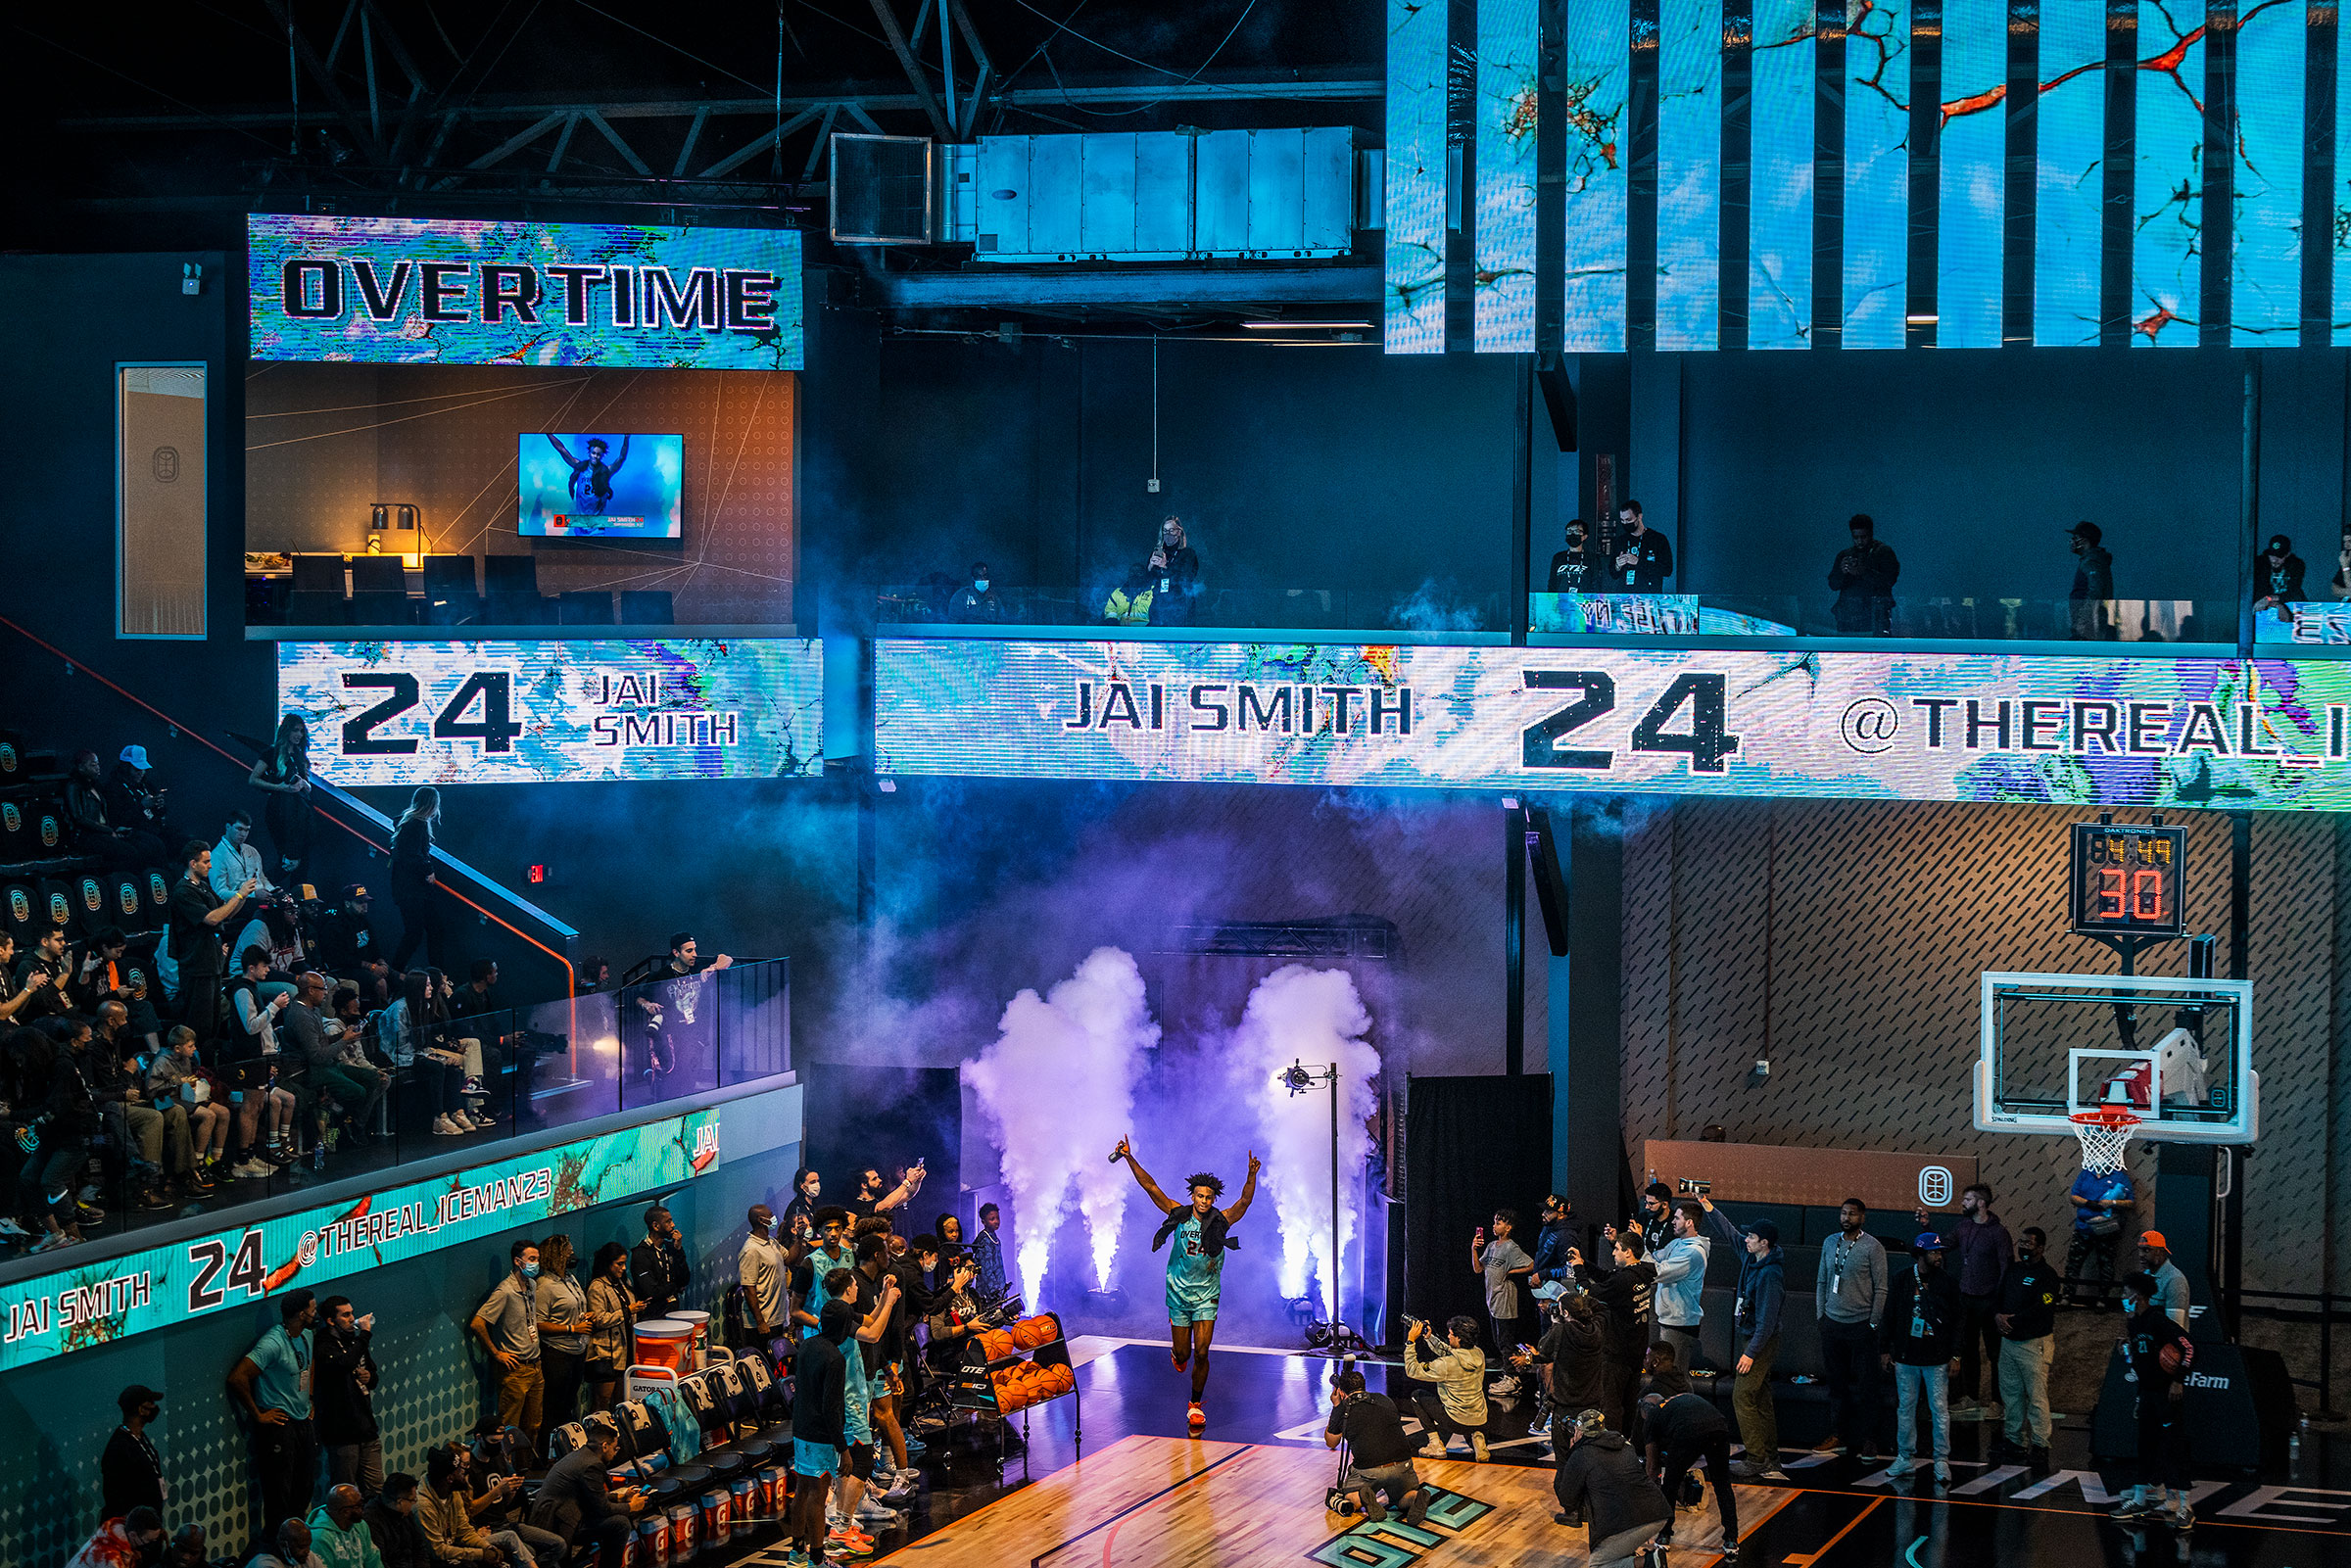 Jai Smith of Team Elite makes his pre-game entrance on the inaugural night of games at the show court at the OTE arena. (Andrew Hetherington for TIME)